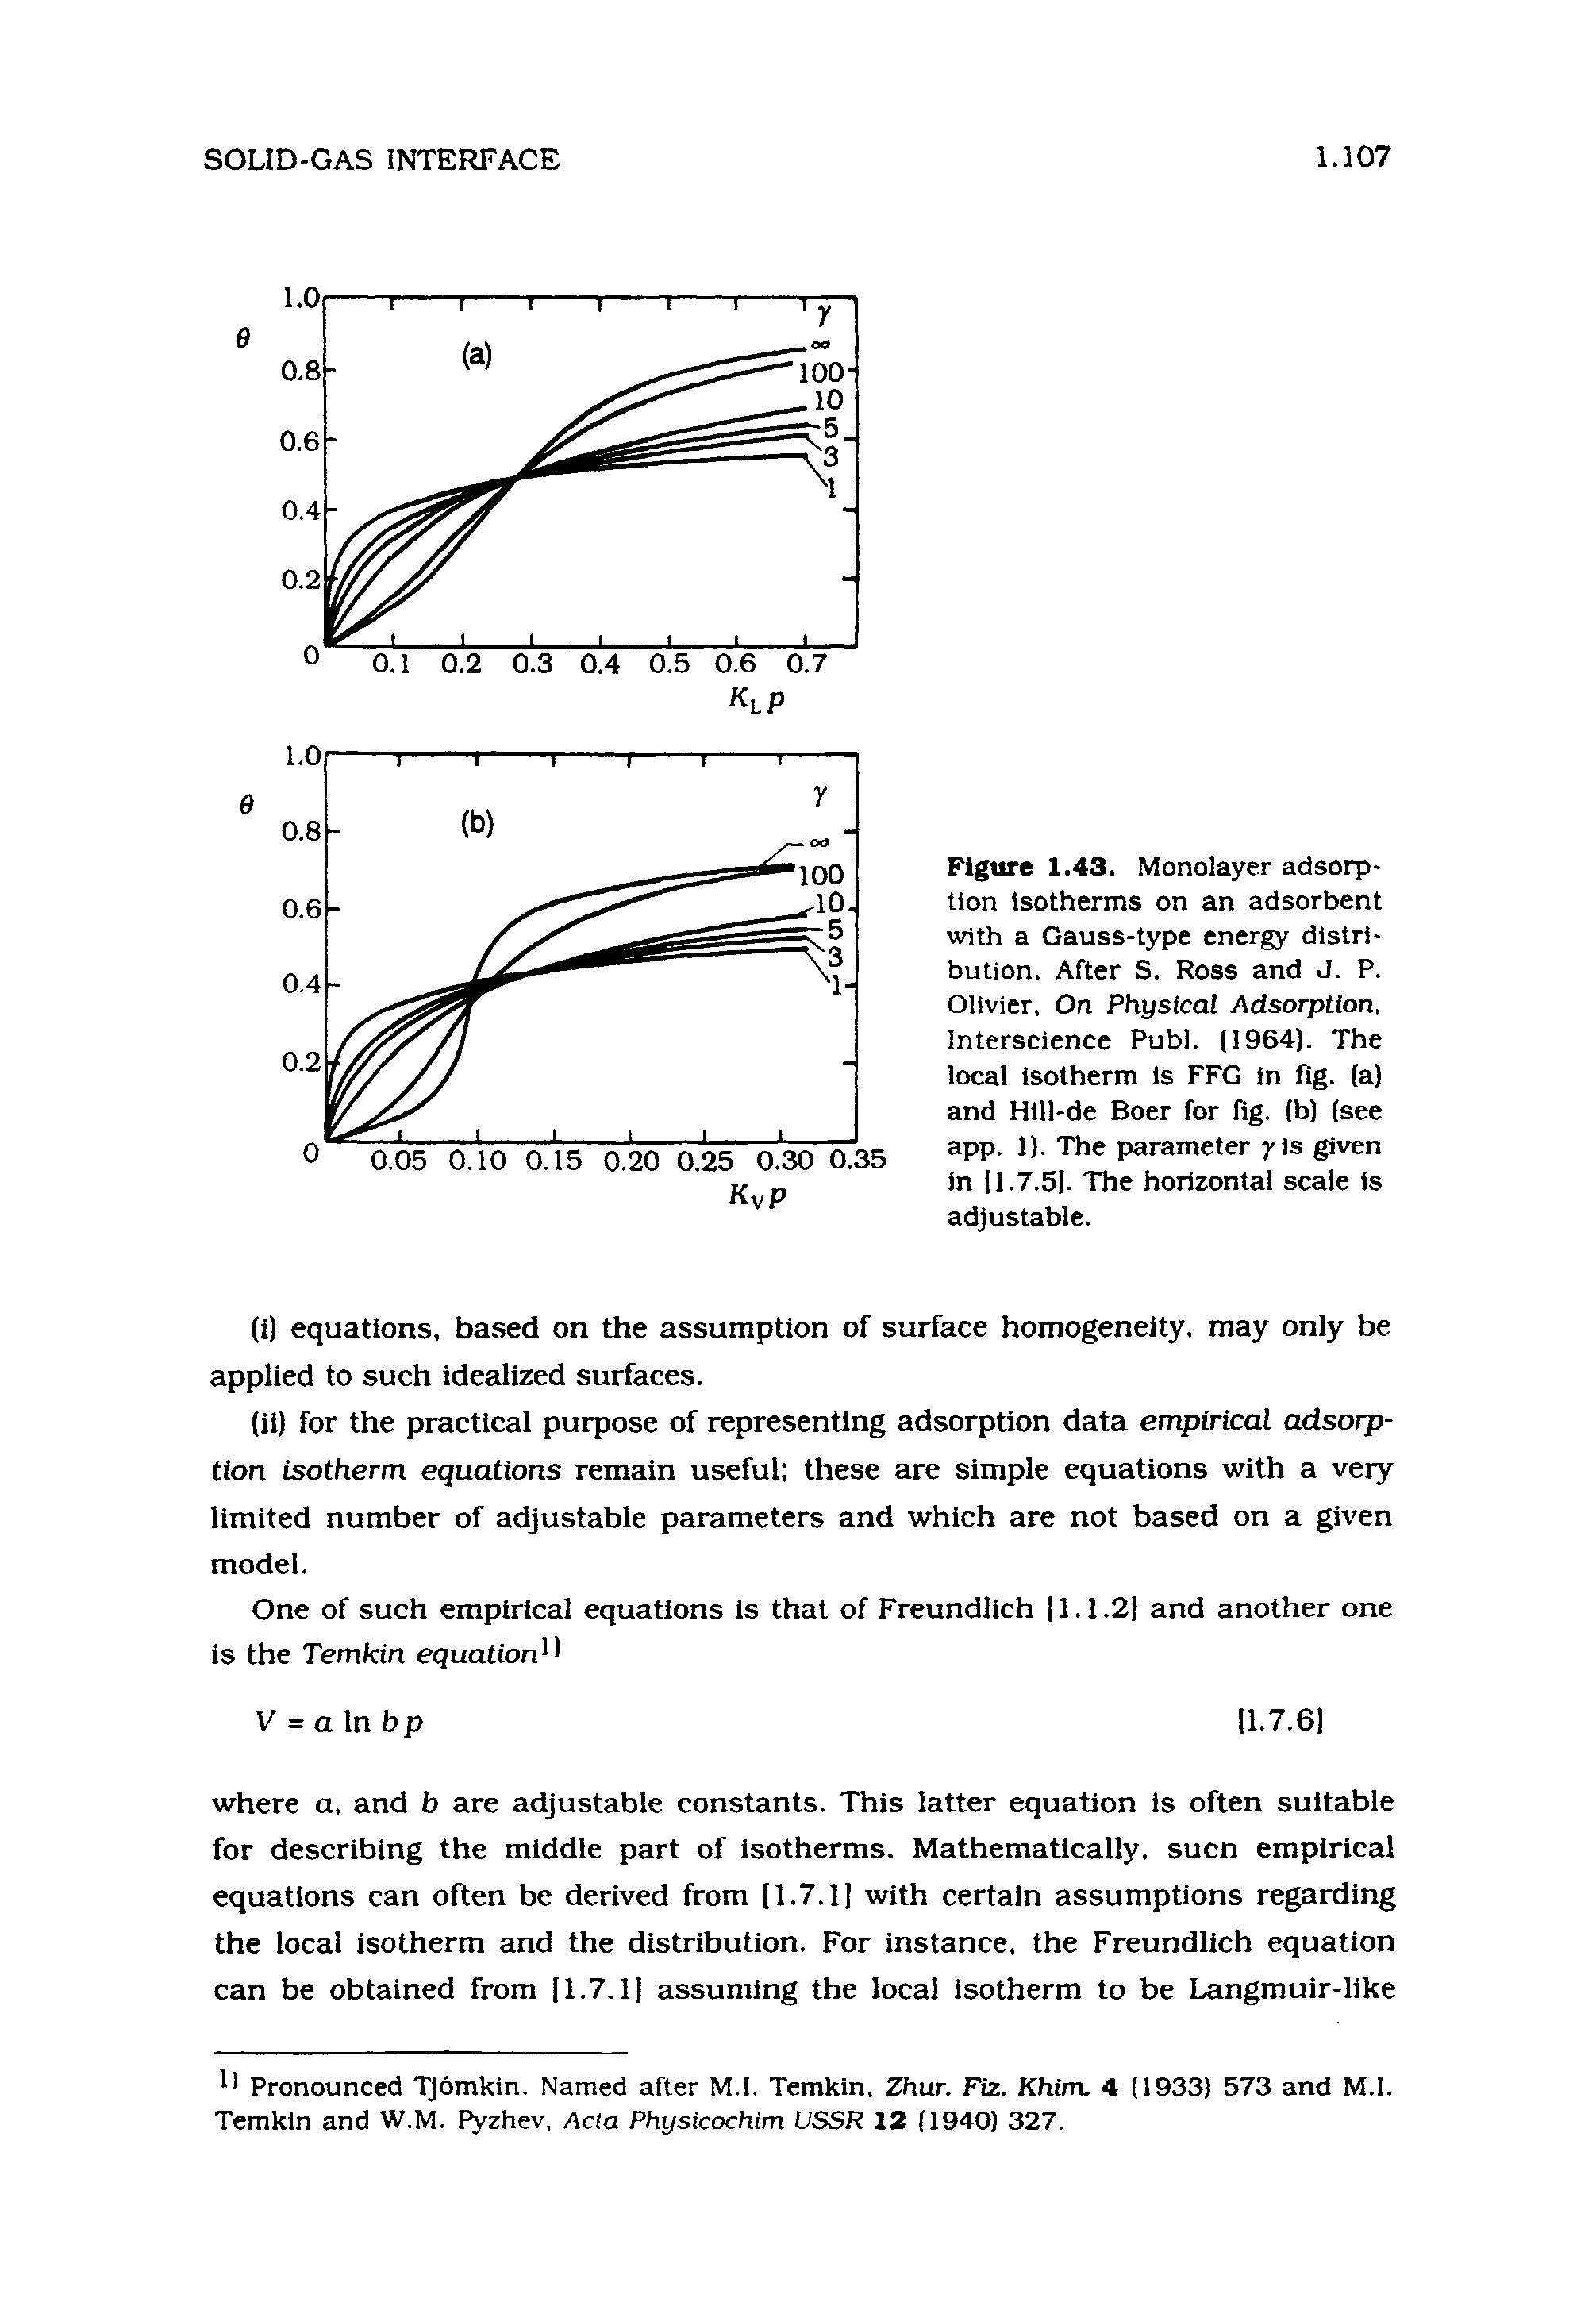 Figure 1.43. Monolayer adsorption Isotherms on an adsorbent with a Gauss-type energy distribution. After S. Ross and J. P. Olivier, On Physical Adsorption, Interscience Publ. (1964). The local Isotherm is FFG in fig. (a) and Hill-de Boer for lig. (b) (see app. 1). The parameter yis given in (1.7.51. The horizontal scale is adjustable.